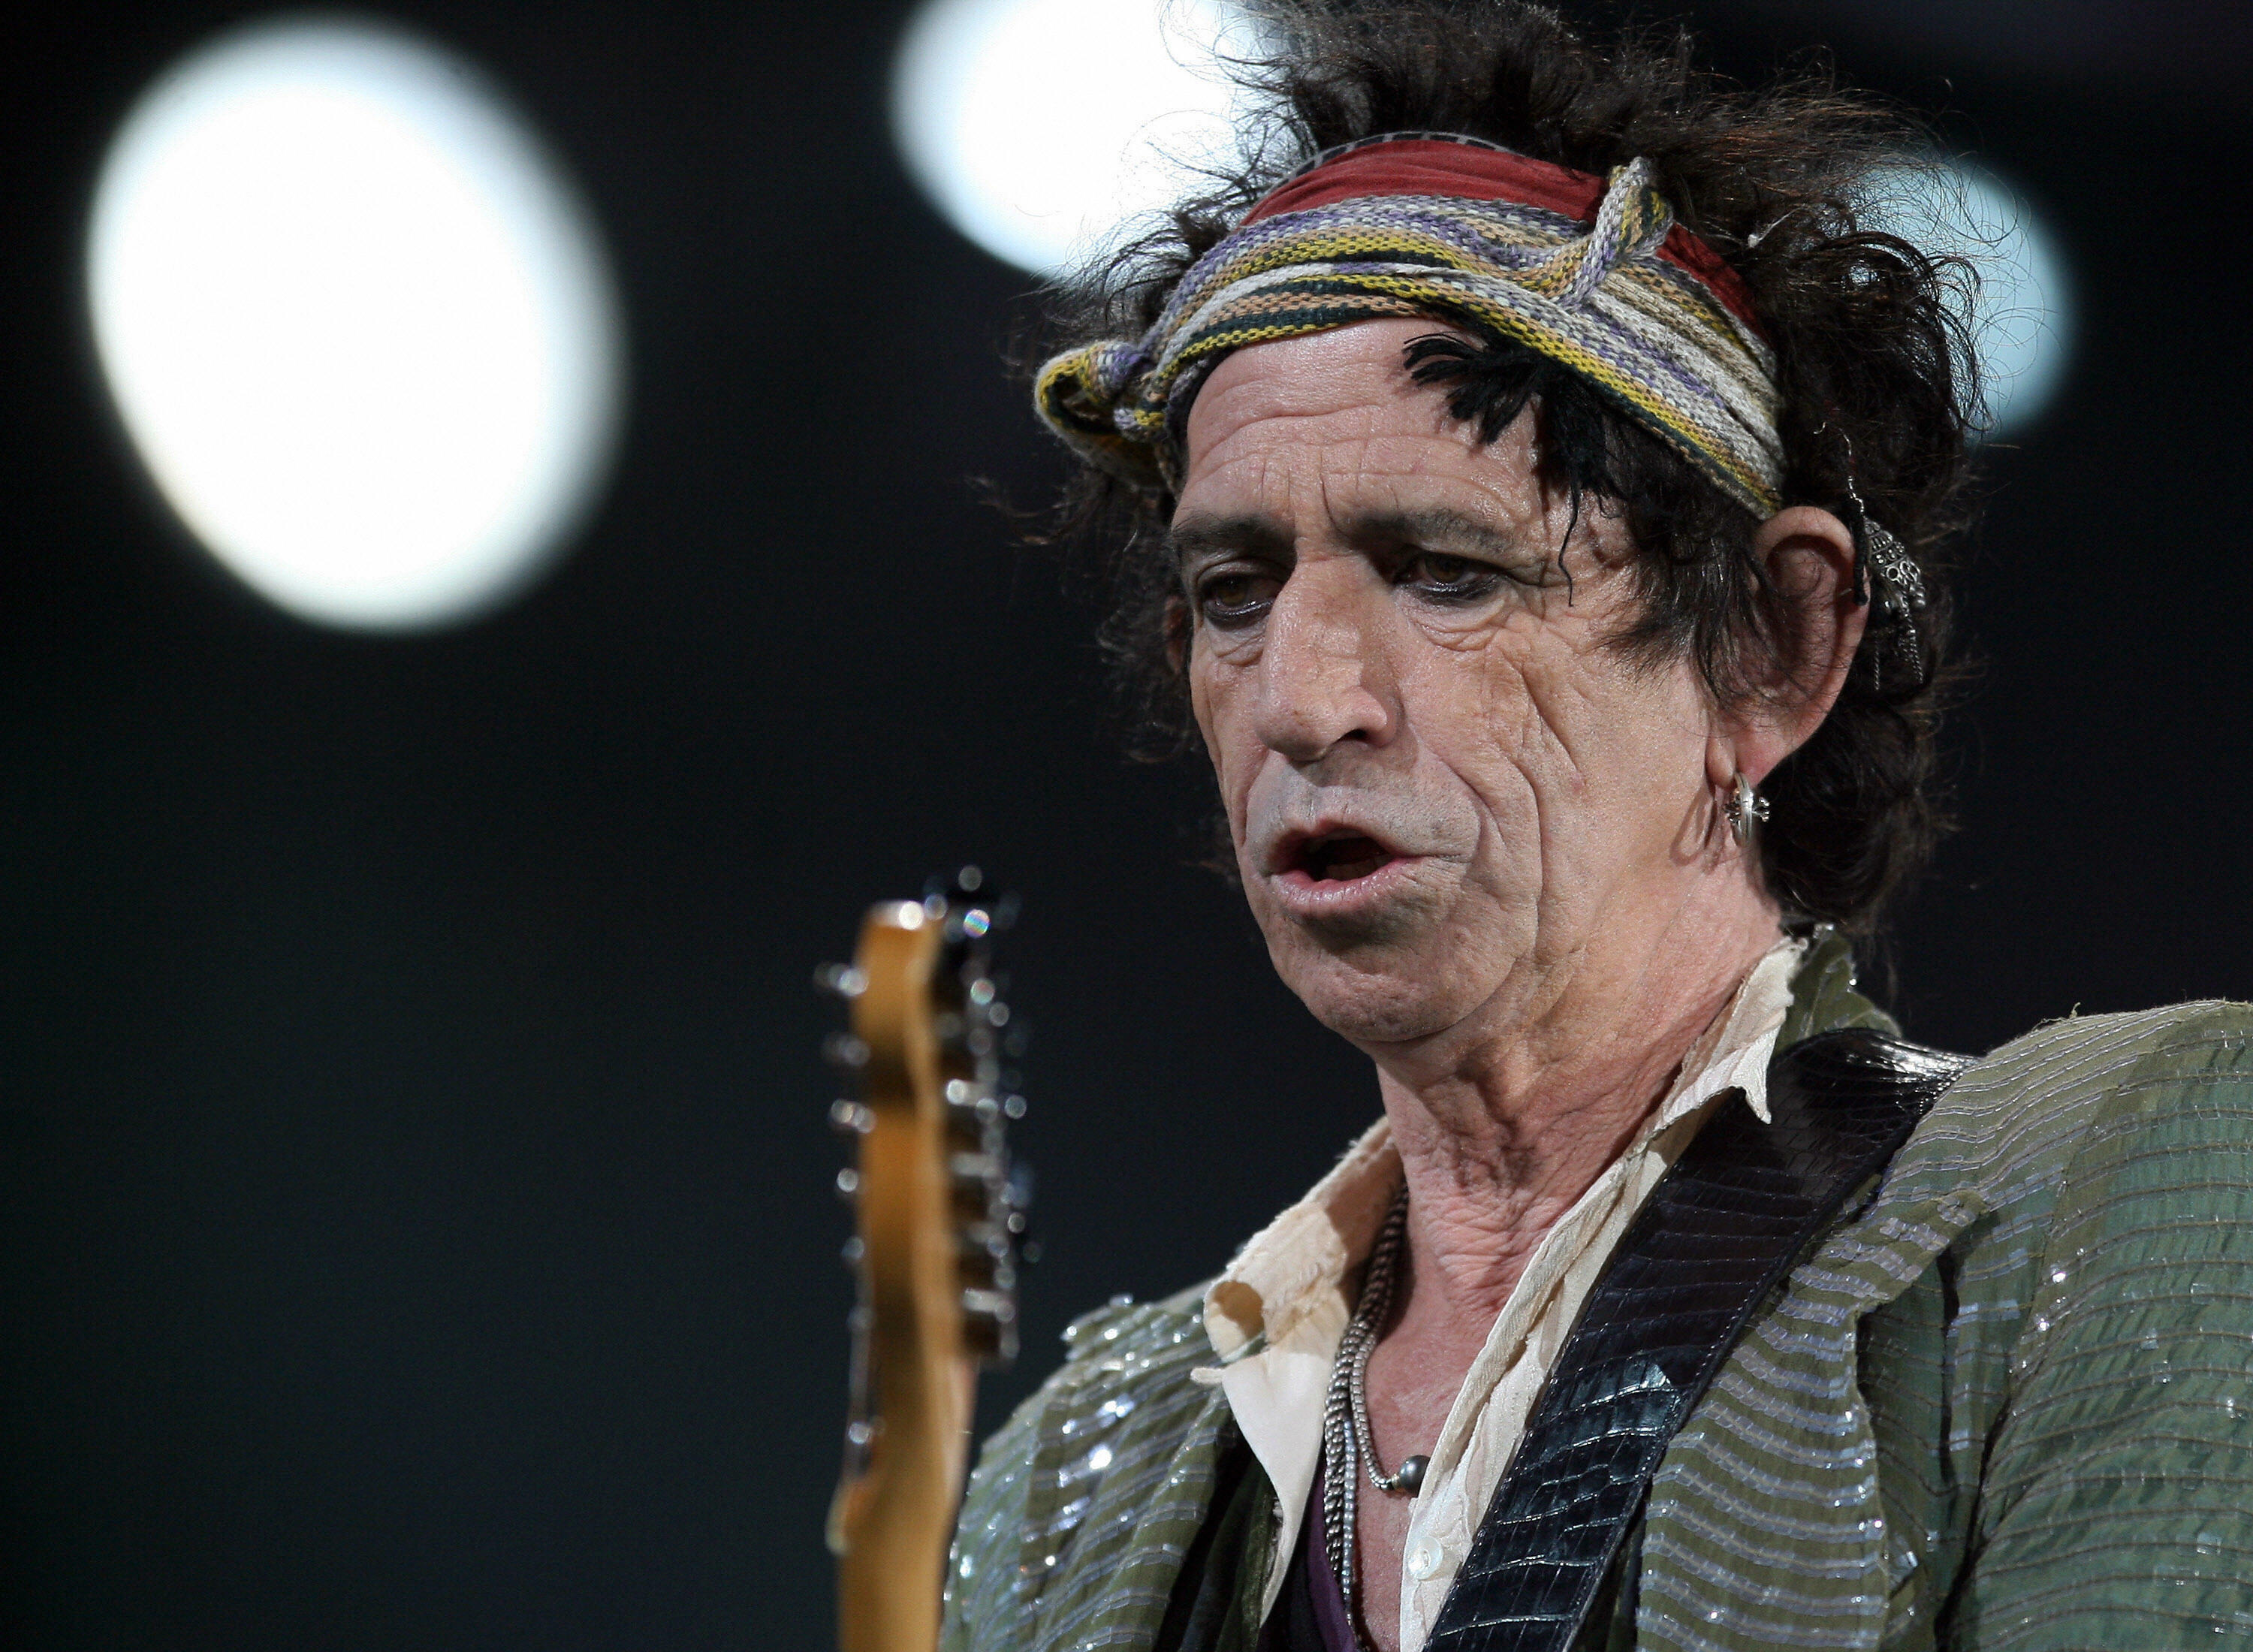 keith richards now and then